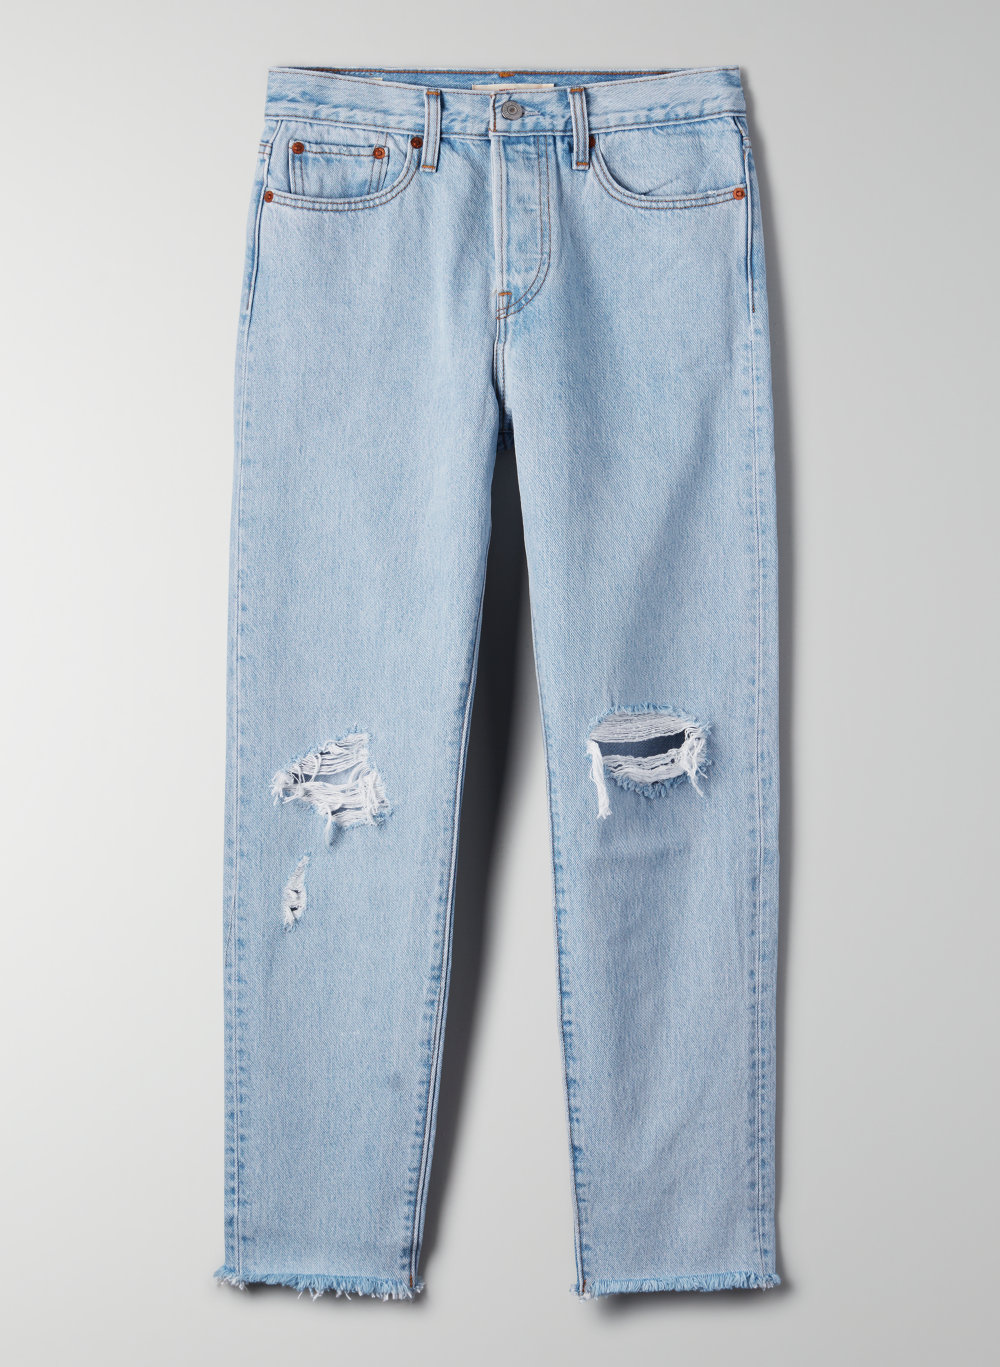 levi's wedgie icon distressed jeans